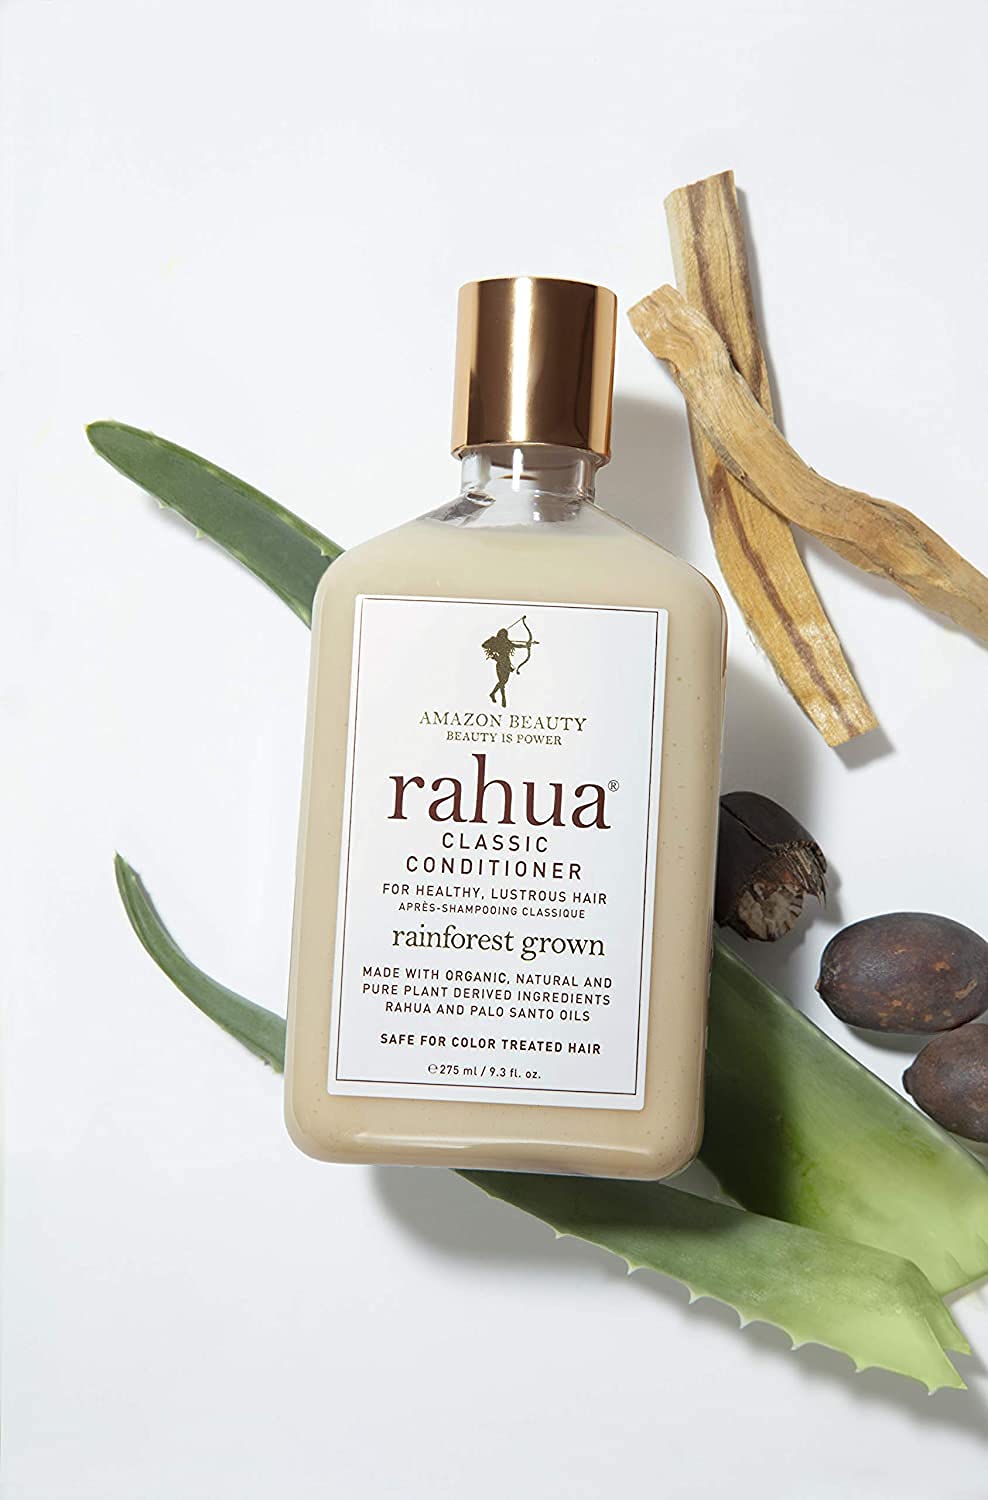 Rahua Classic Conditioner 9.3 Fl Oz, Made With Organic Ingredients for Healthy Scalp and Hair, Safe for Color Treated Hair, Shampoo with Palo Santo Aroma, Best for All Hair Types